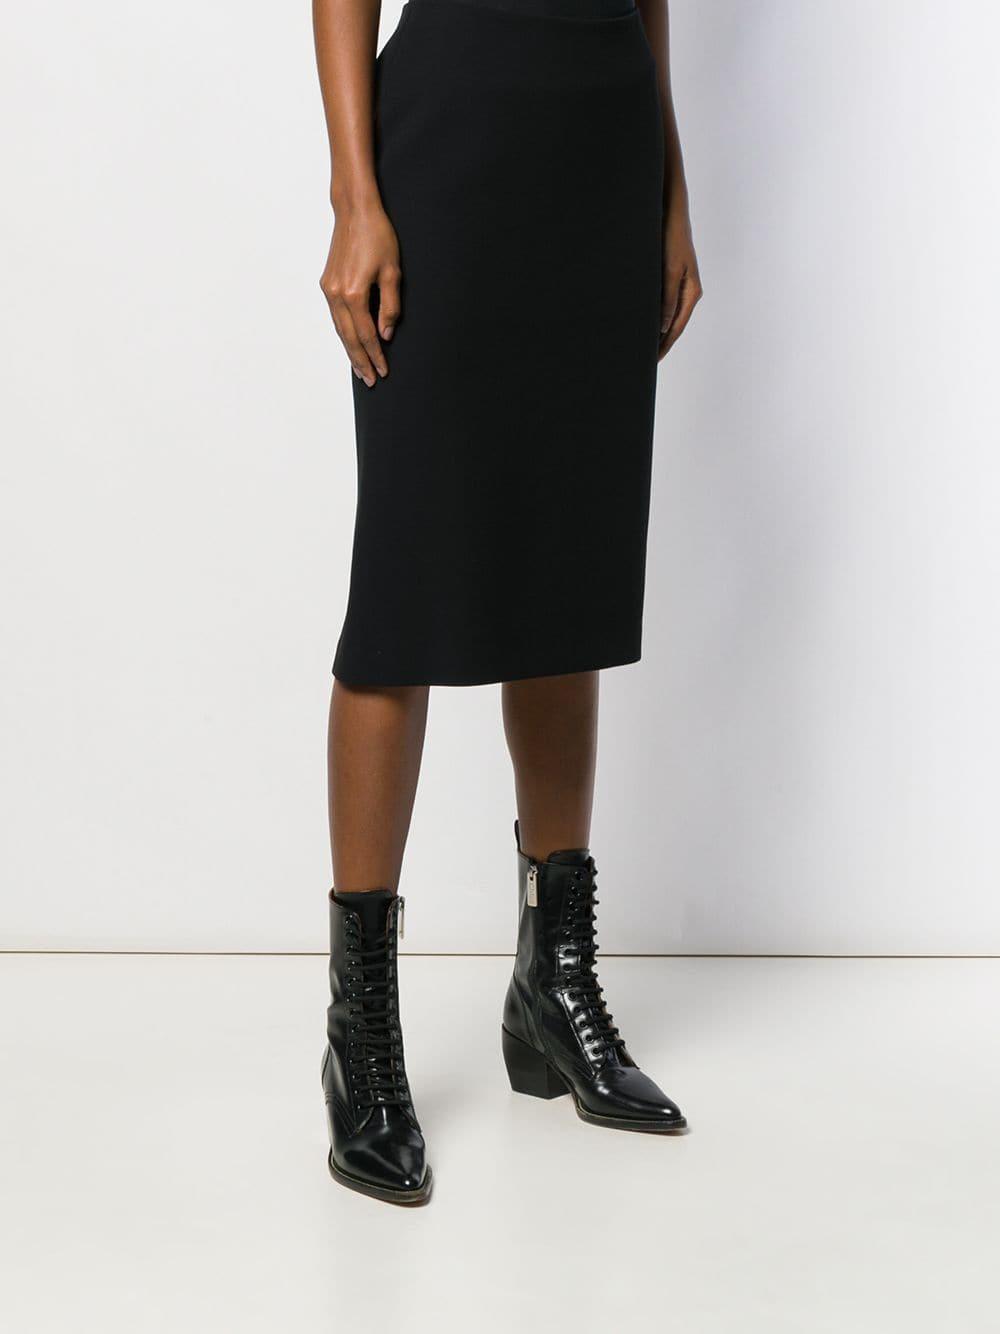 Ralph Lauren Collection Synthetic Classic Pencil Skirt in Black - Lyst